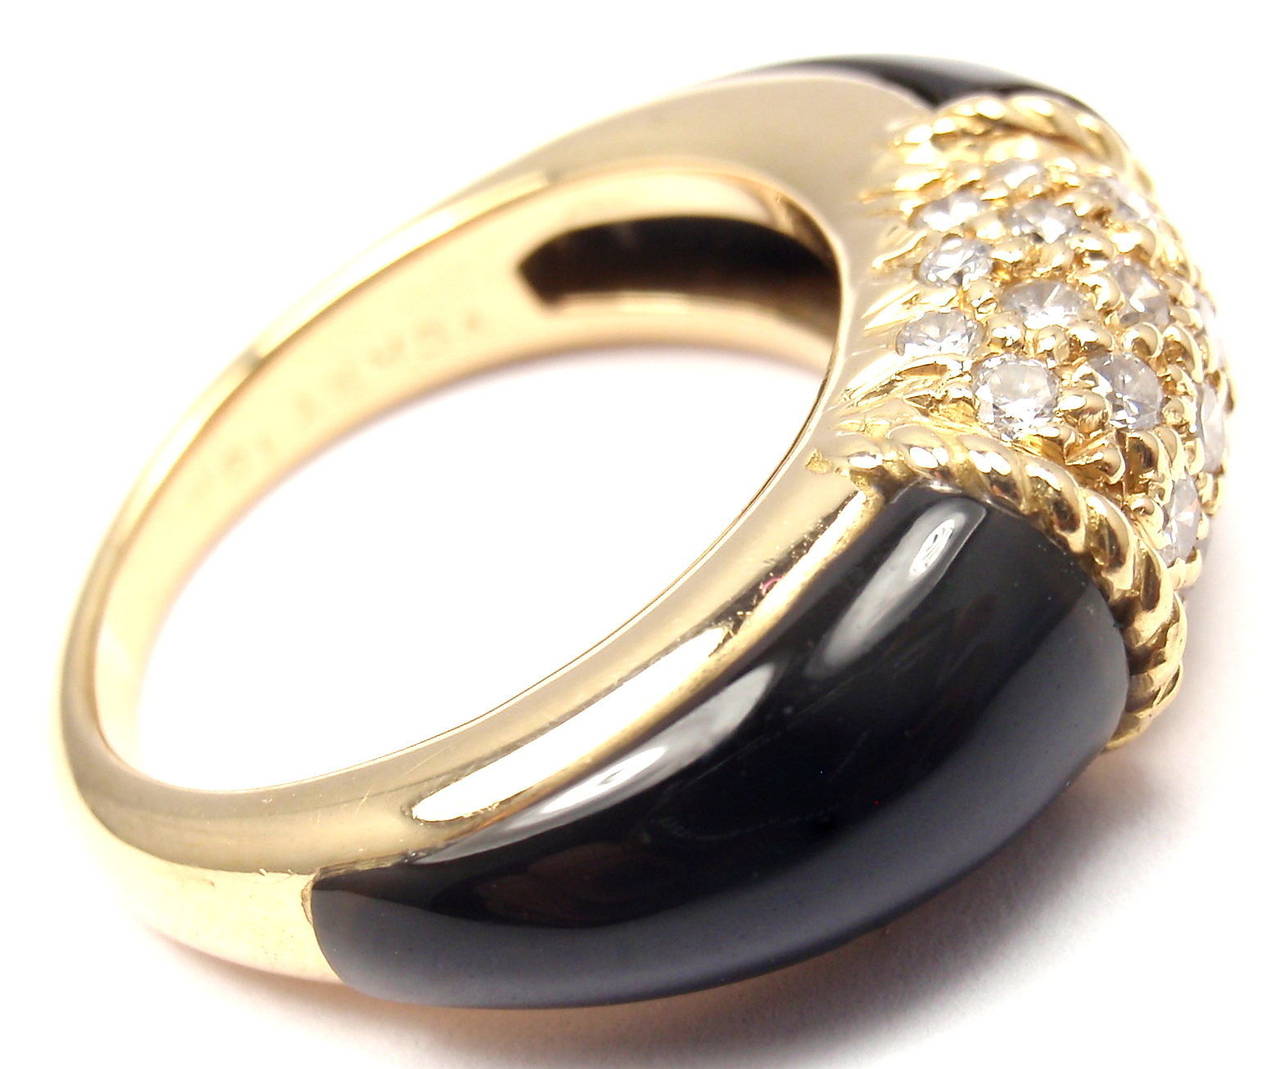 18k Yellow Gold Diamond & Black Onyx Ring by Van Cleef & Arpels. 
With24 round brilliant cut diamond VS1 clarity, G color total weight .70ct
Onyx. And 2 beautiful black onyx stones.

Details: 
Size: 6
Width: 18mm
Weight: 7.2 grams
Stamped